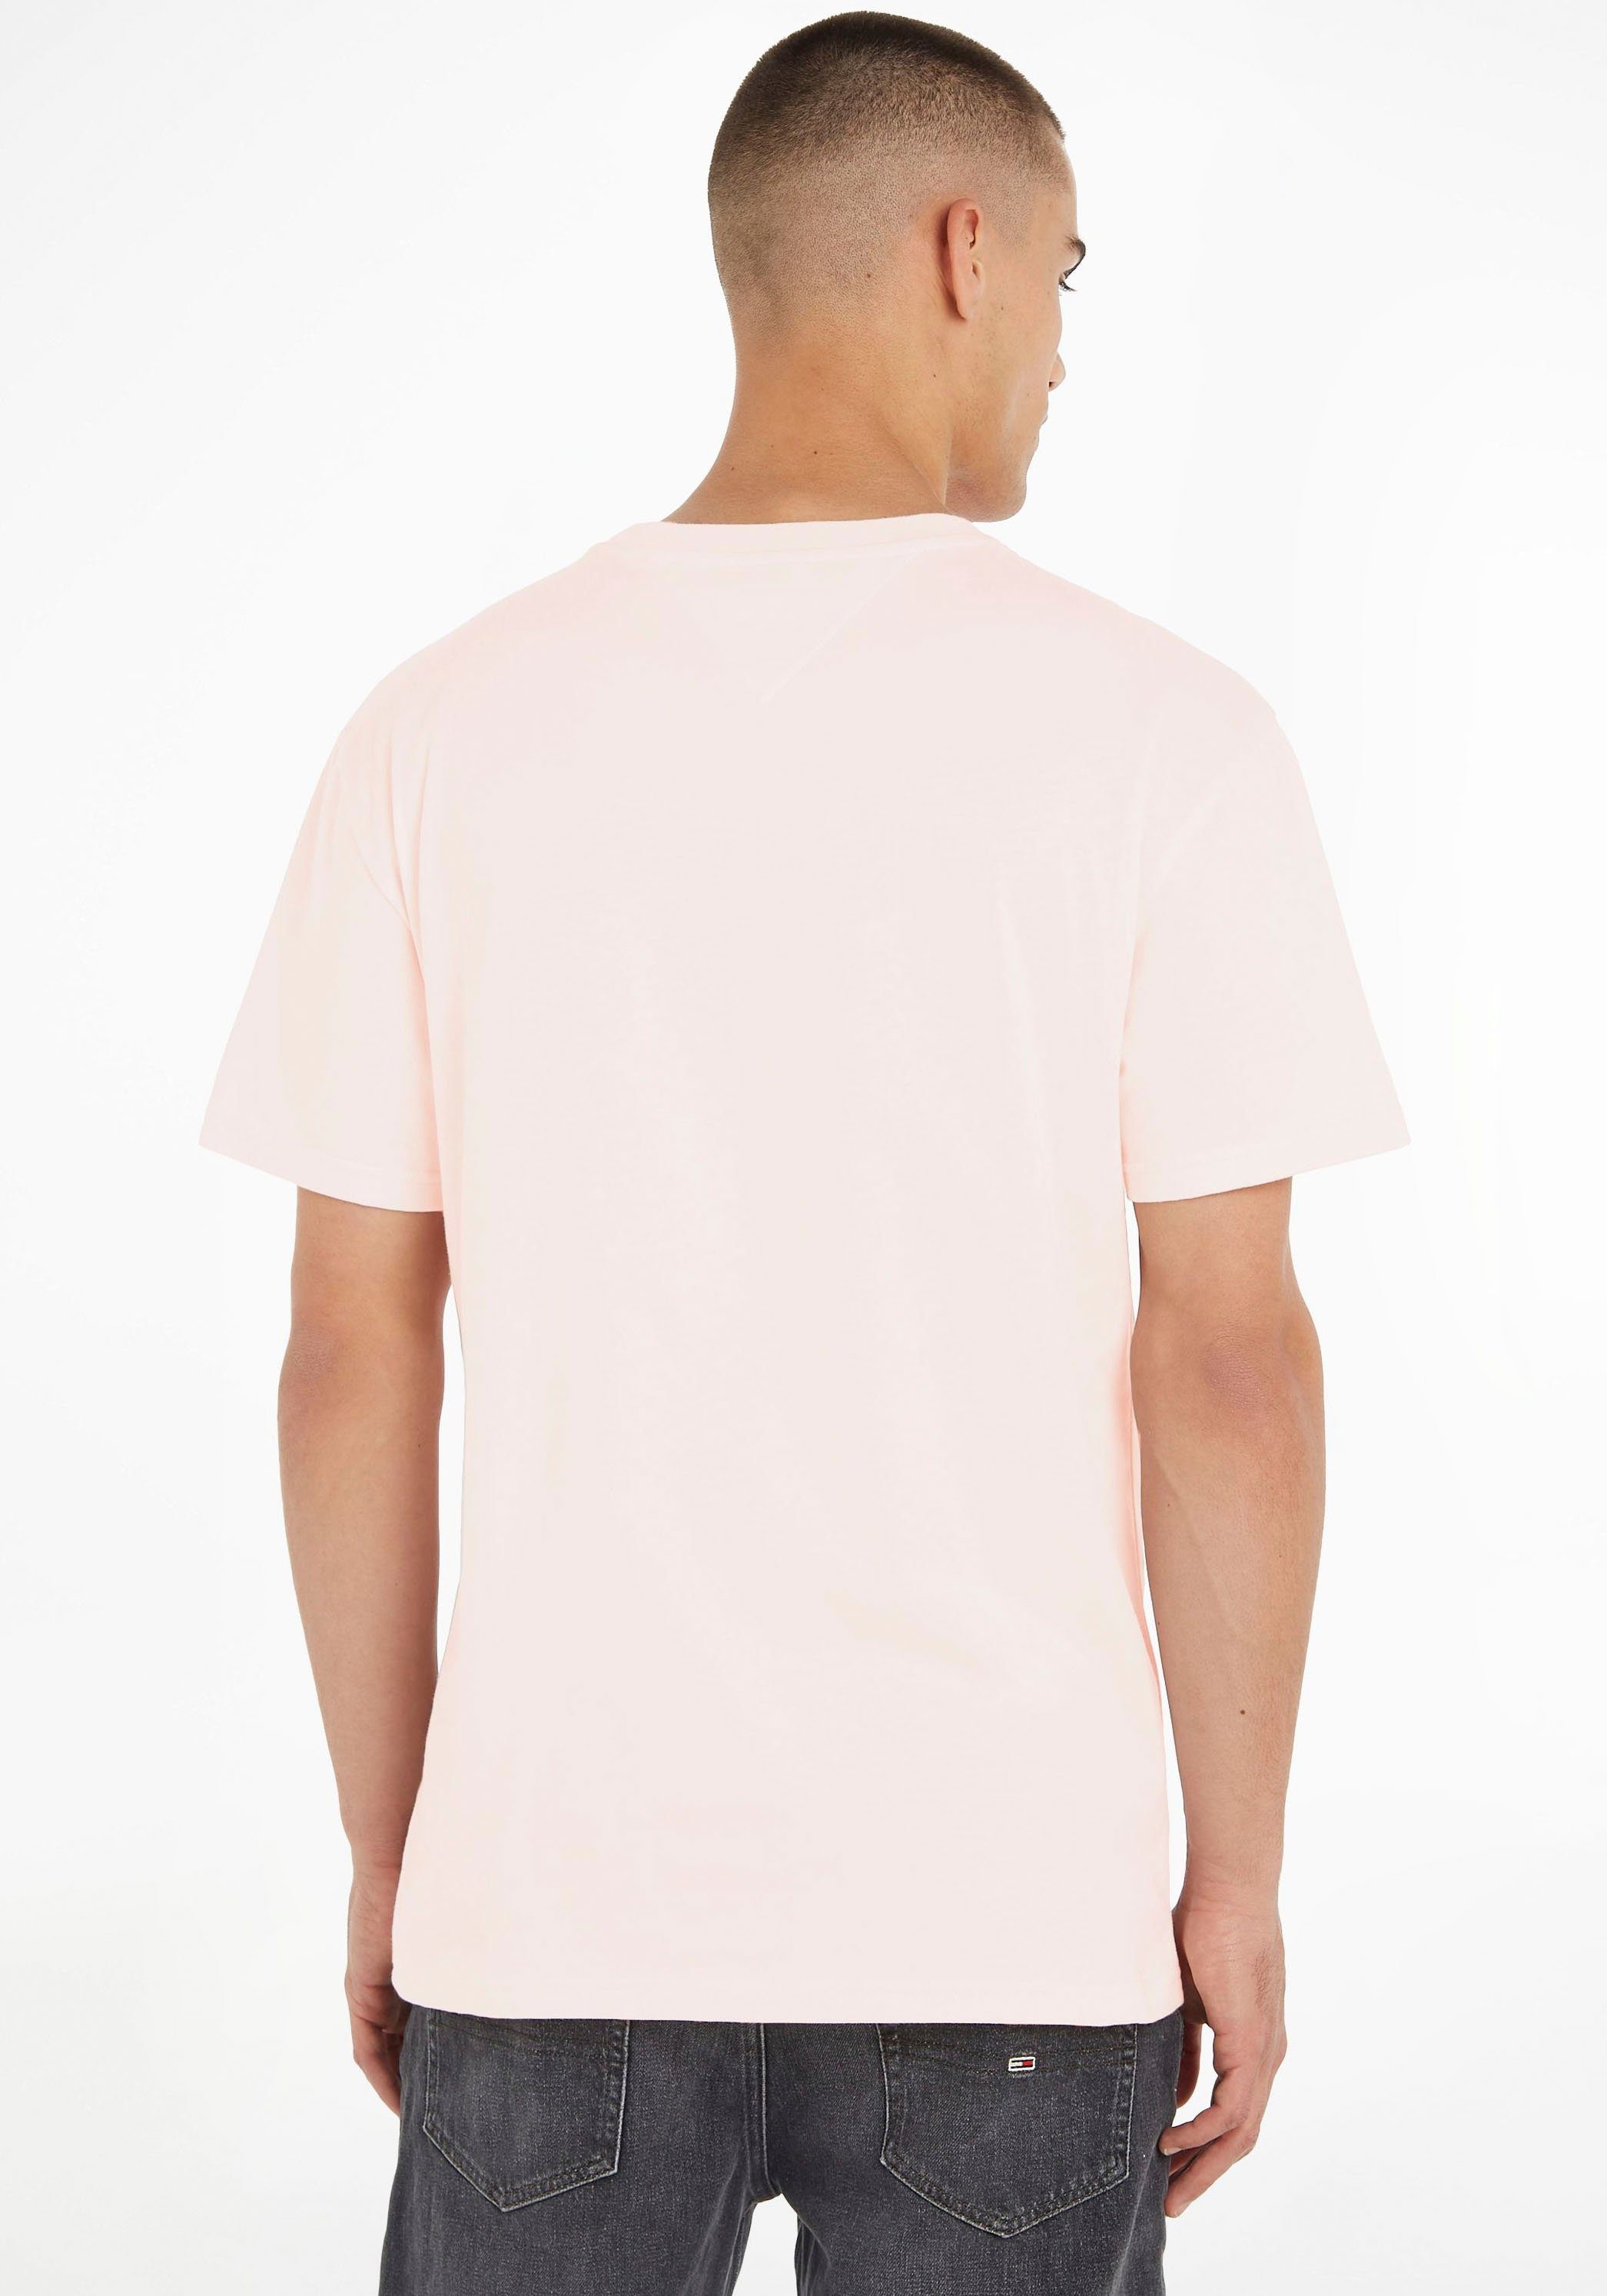 Tommy Jeans T-Shirt TEXT Pink TJM TEE Faint CLSC SMALL